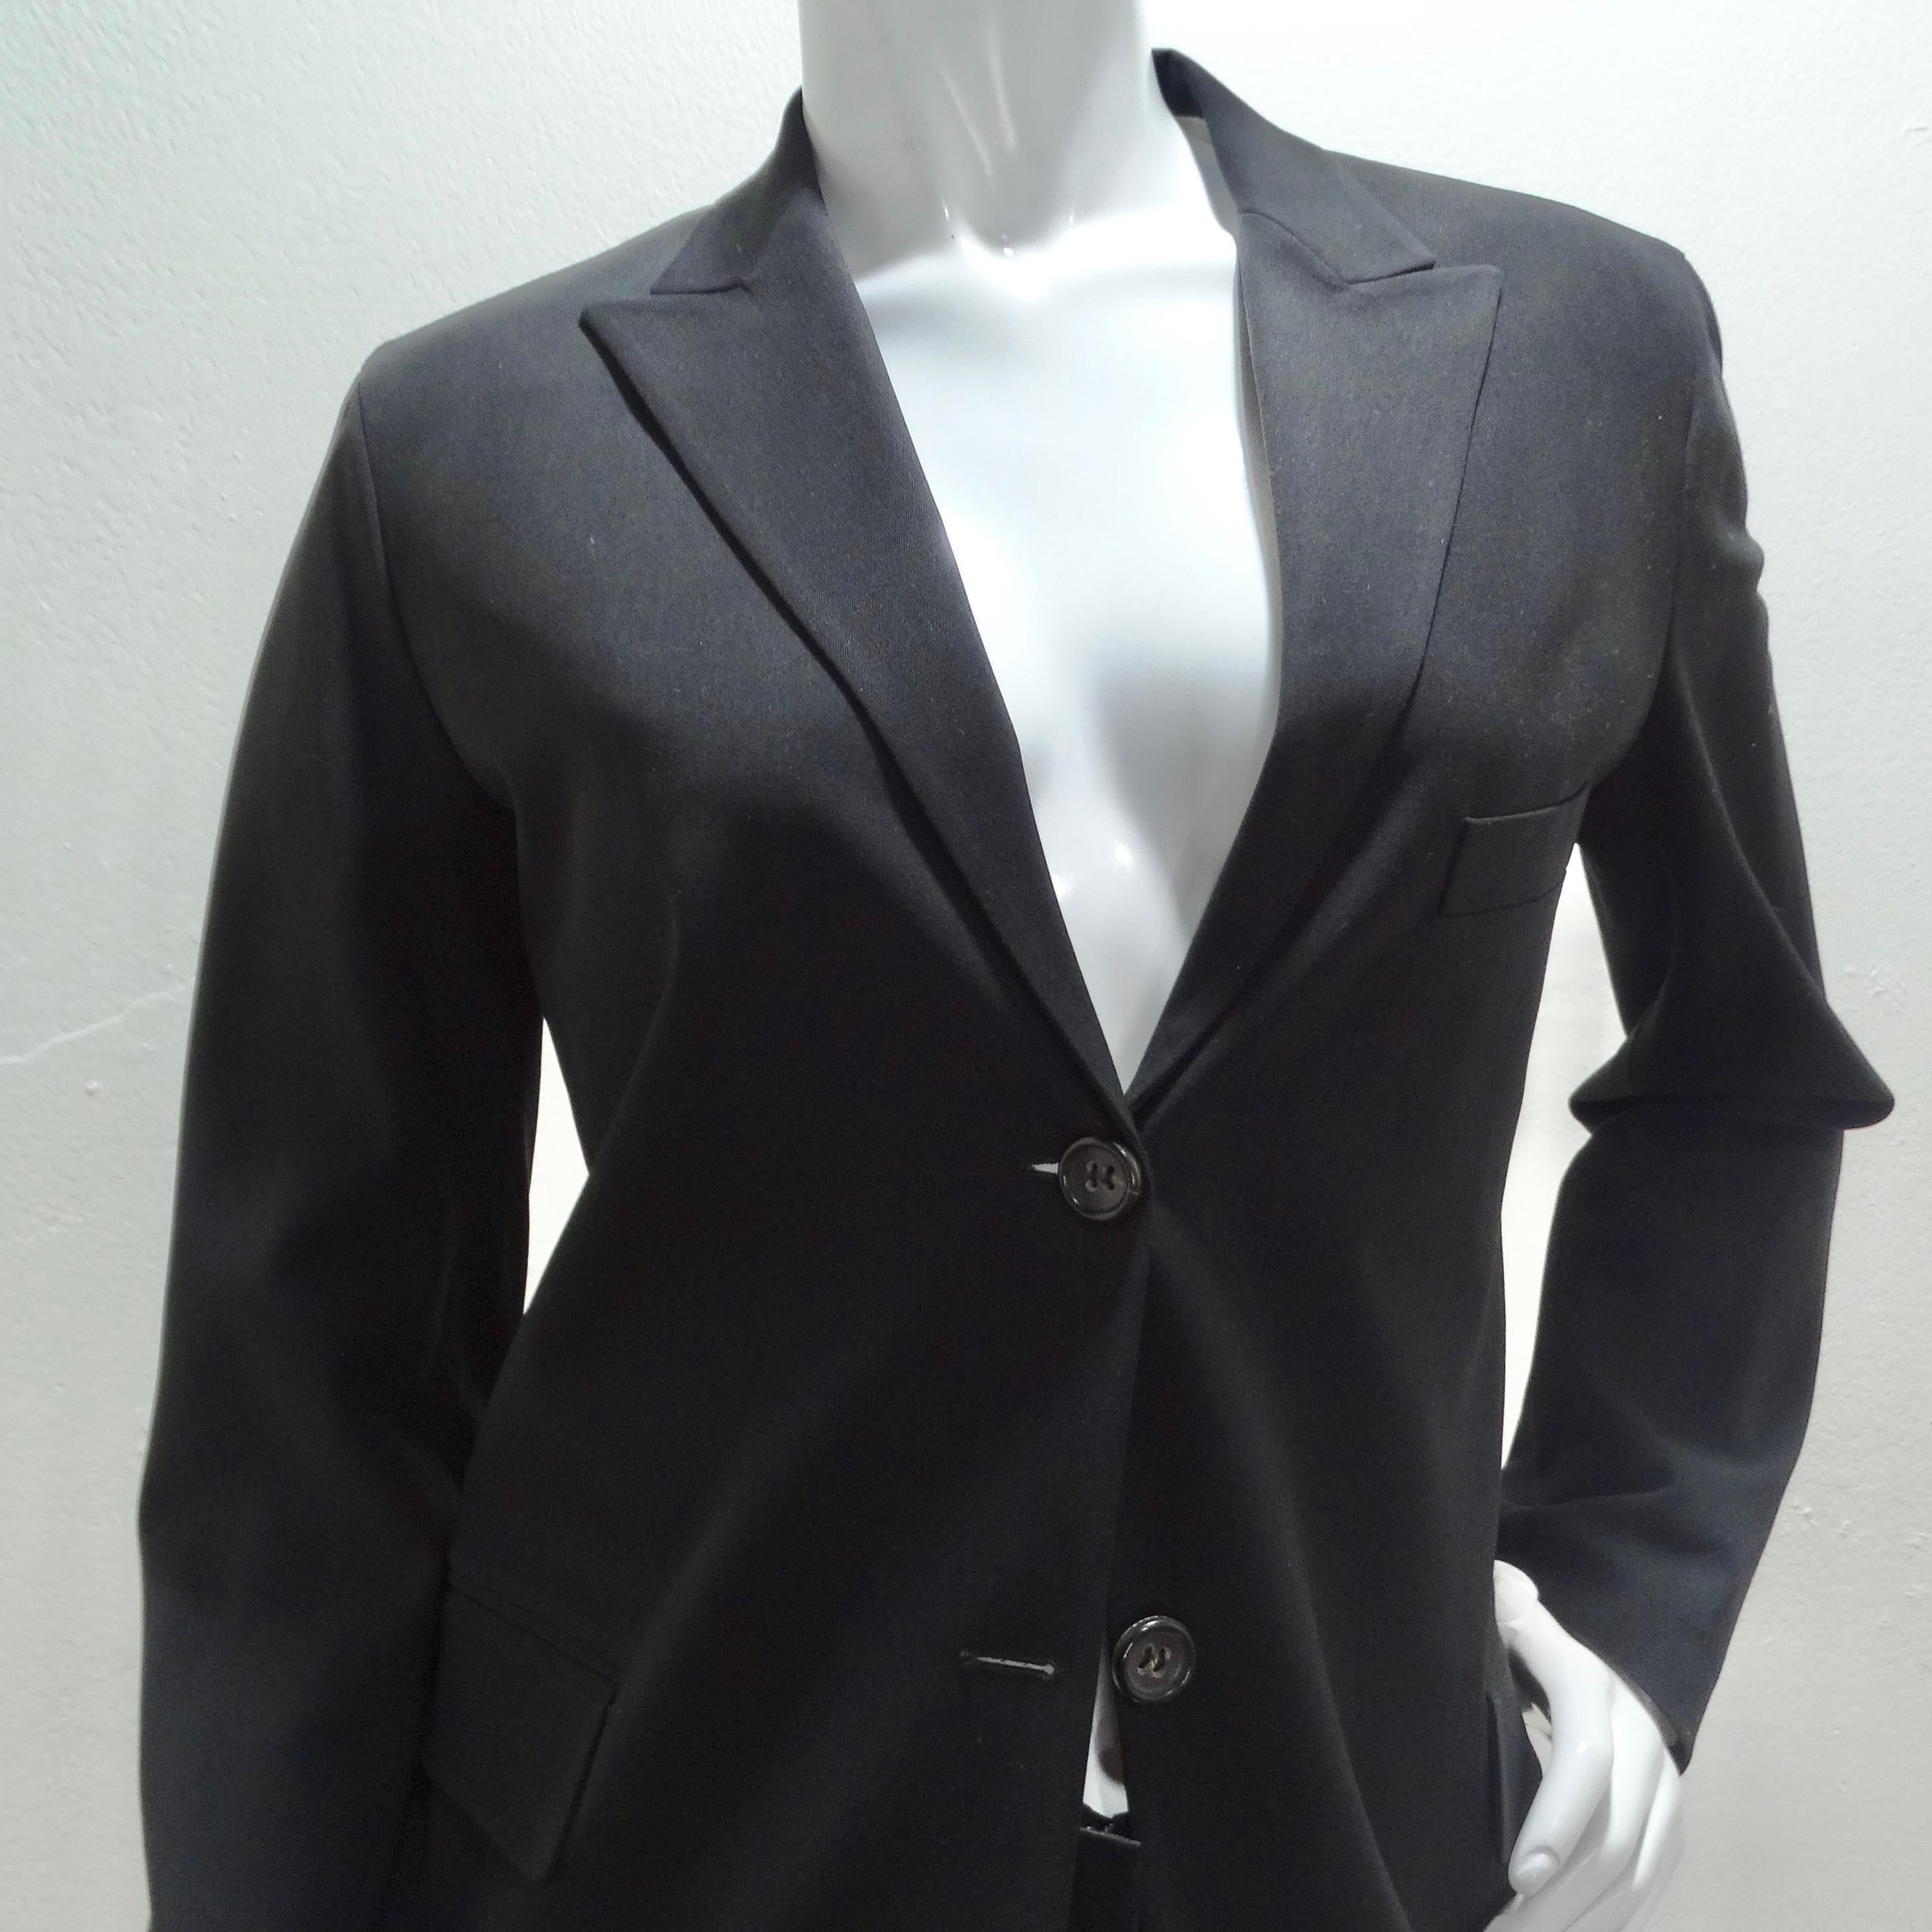 Elevate your style with this iconic Jill Sander 90s Black Blazer & Trouser Suit Set! Embrace the timeless sophistication of the classic black blazer, adorned with a collar, central buttons, and convenient pockets. The flattering straight-cut